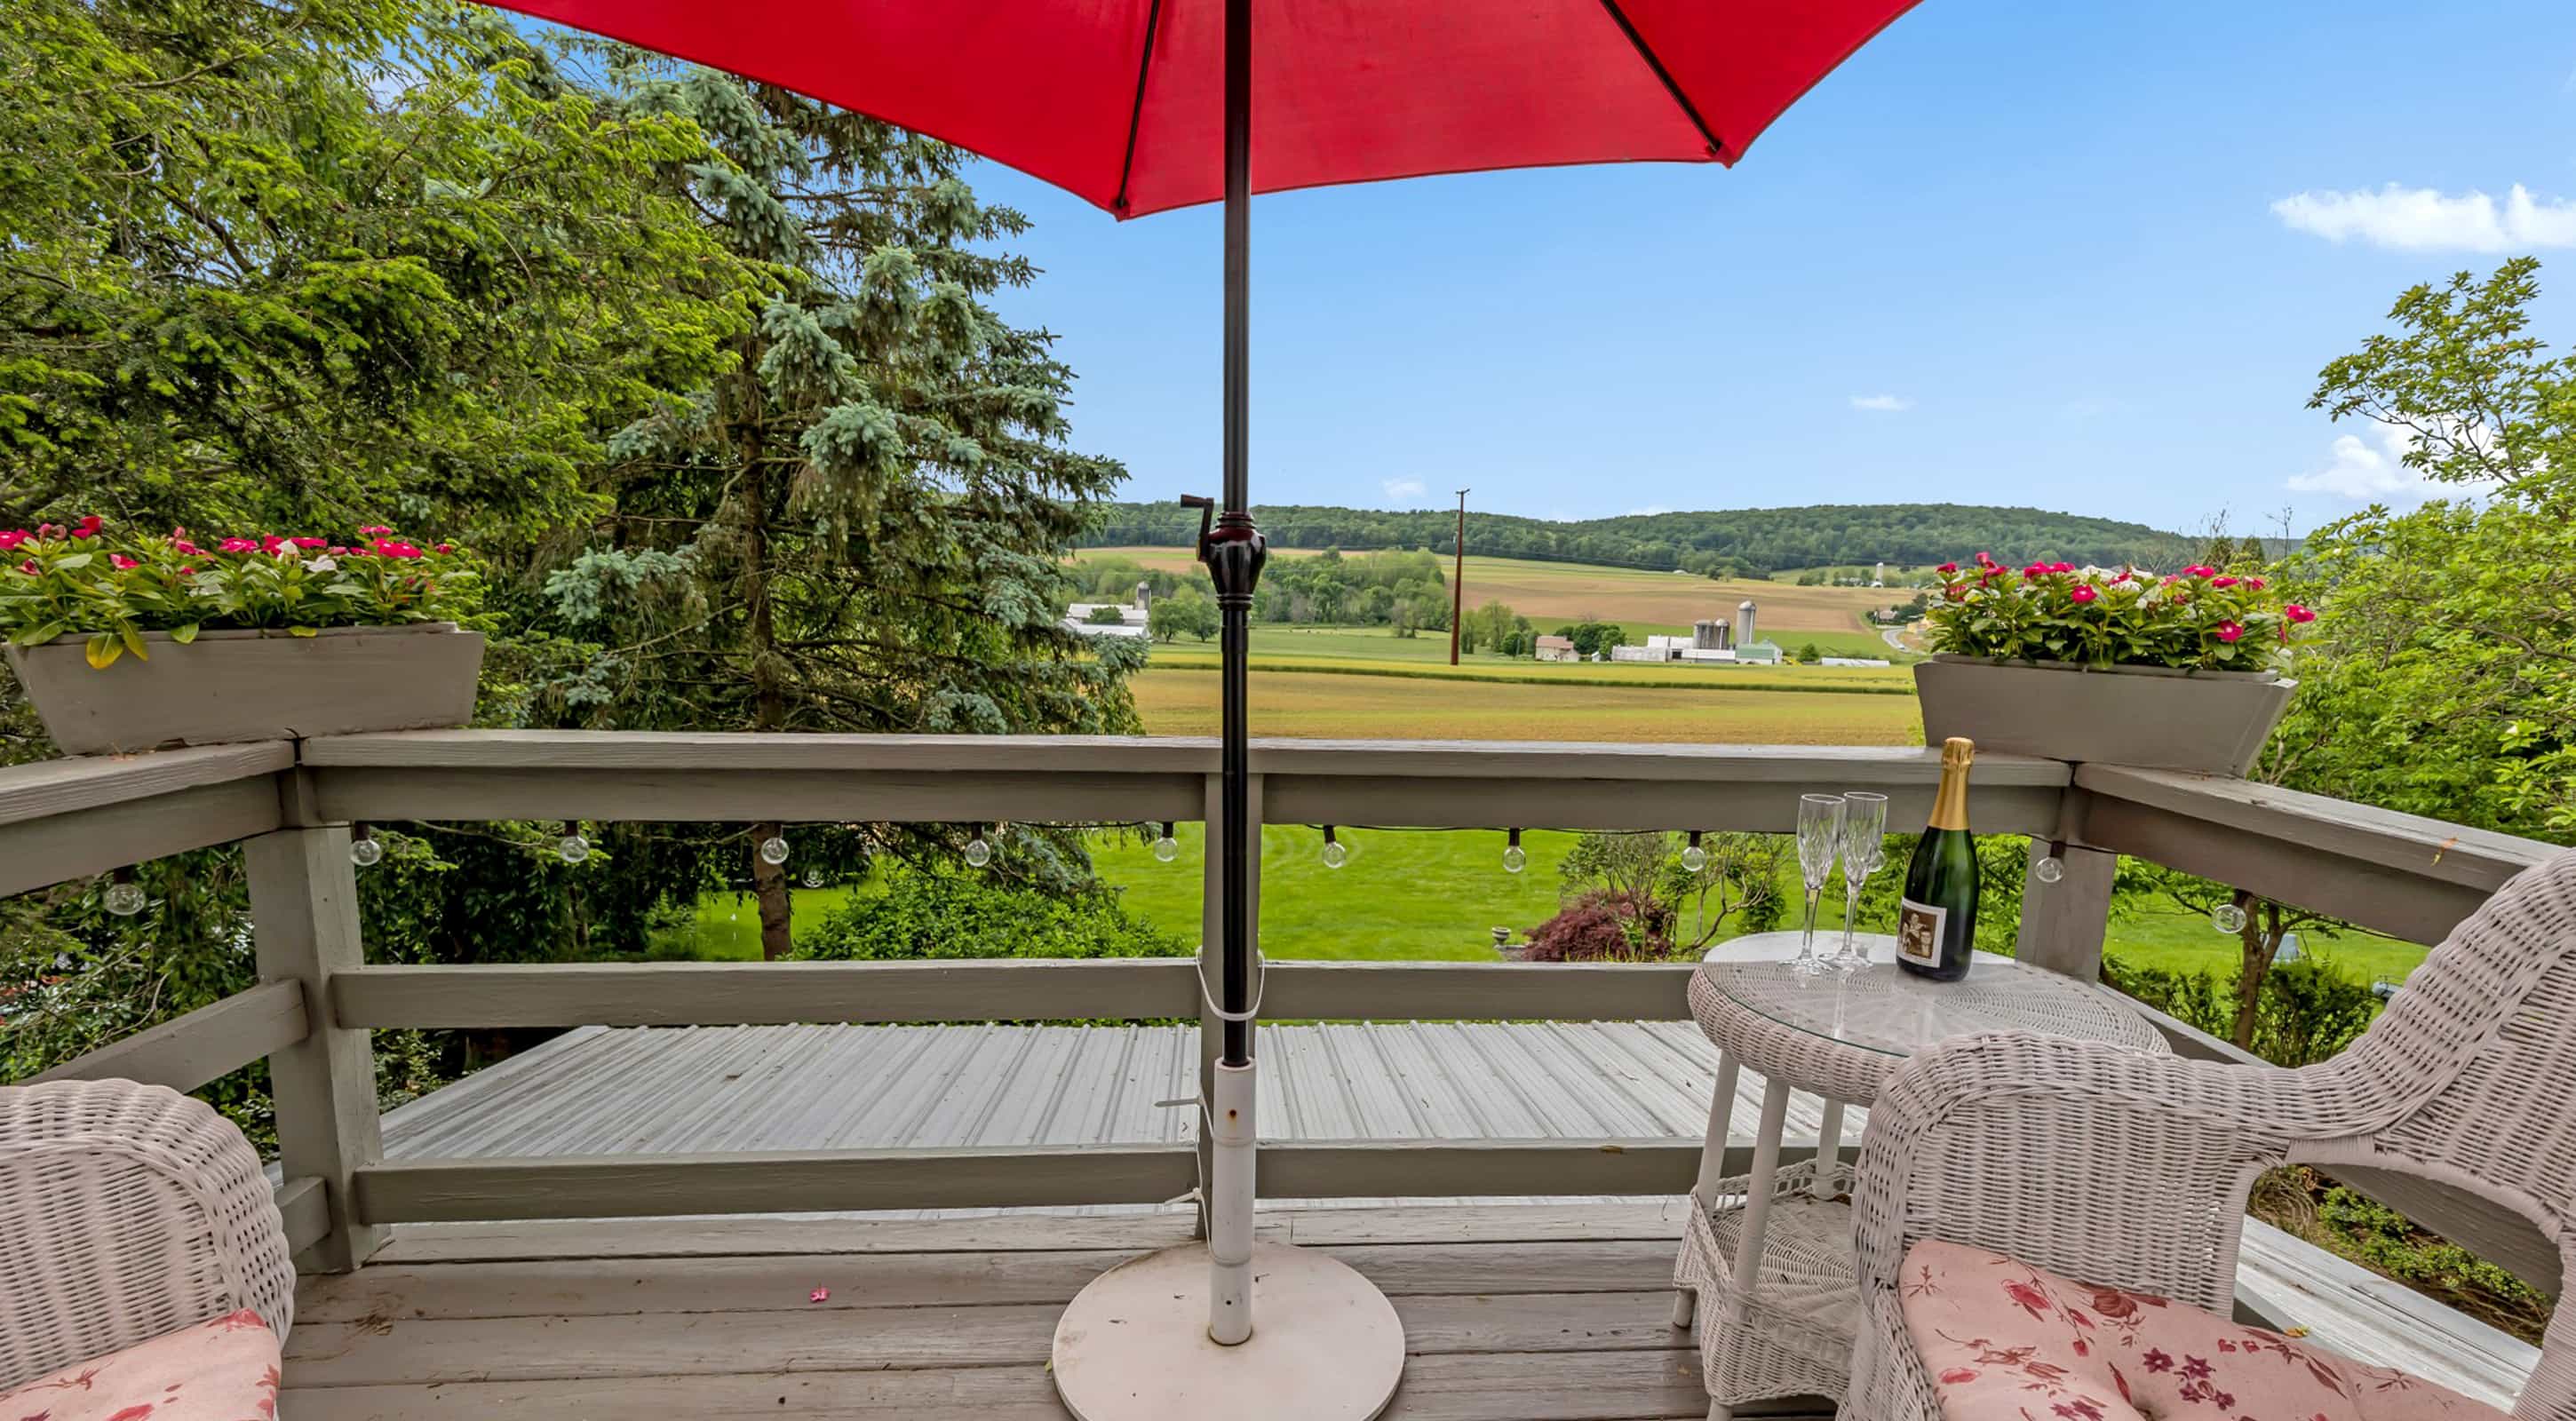 sunny patio with view perfect for a Pennsylvania vacation